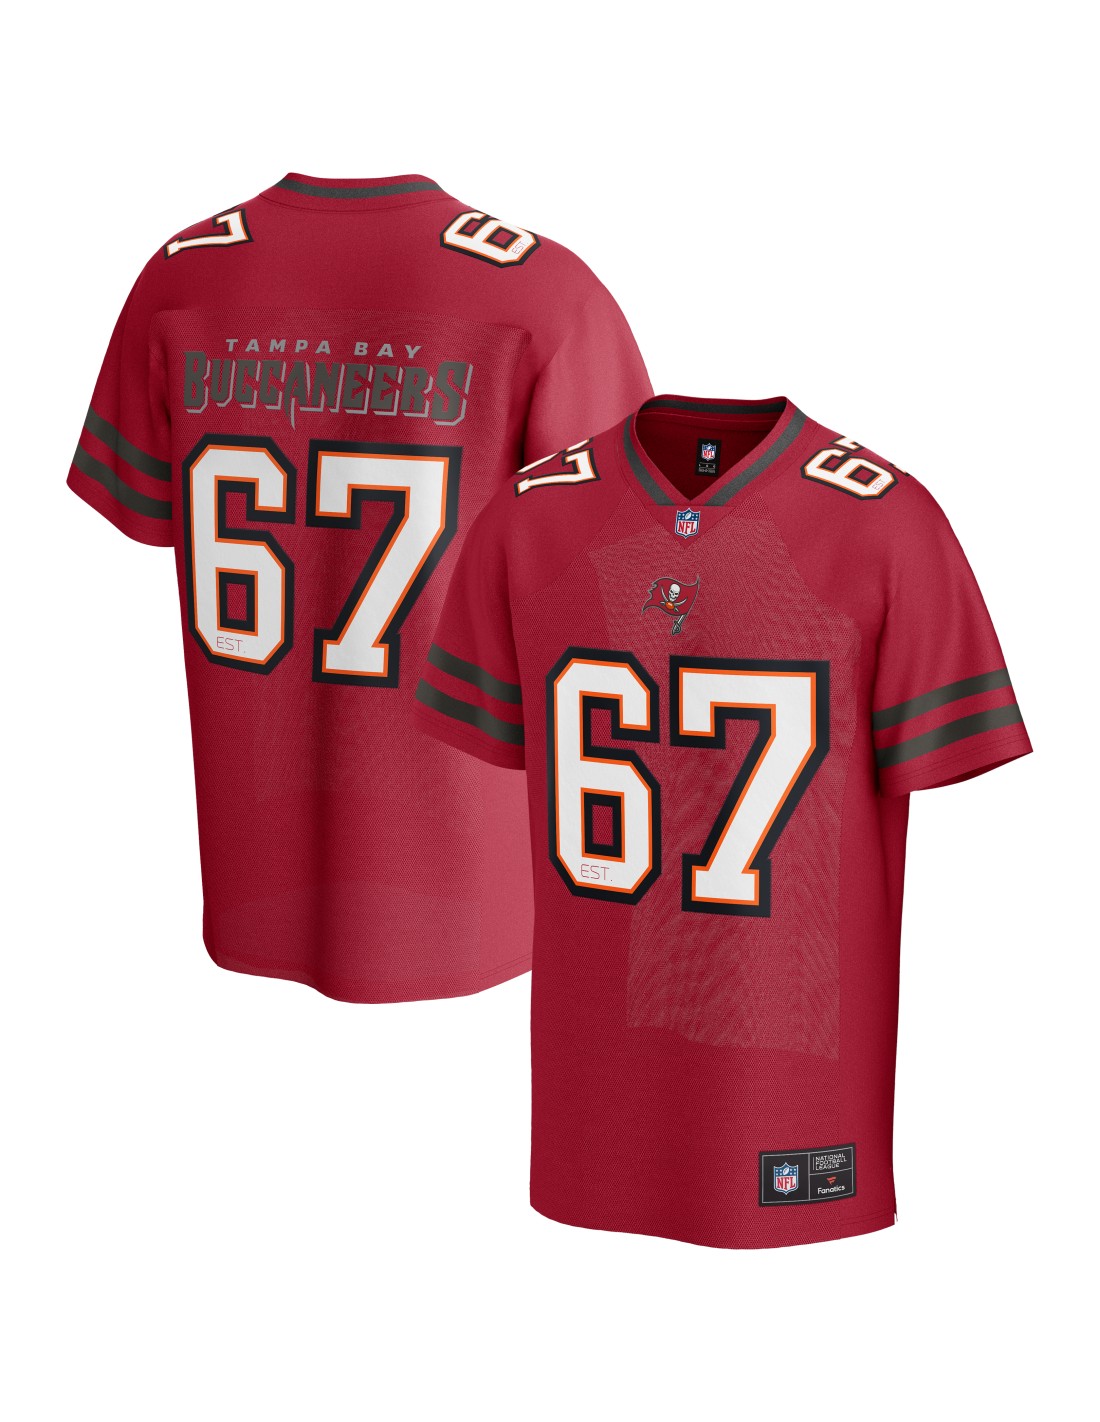 Tampa Bay Buccaneers Core Foundation Jersey